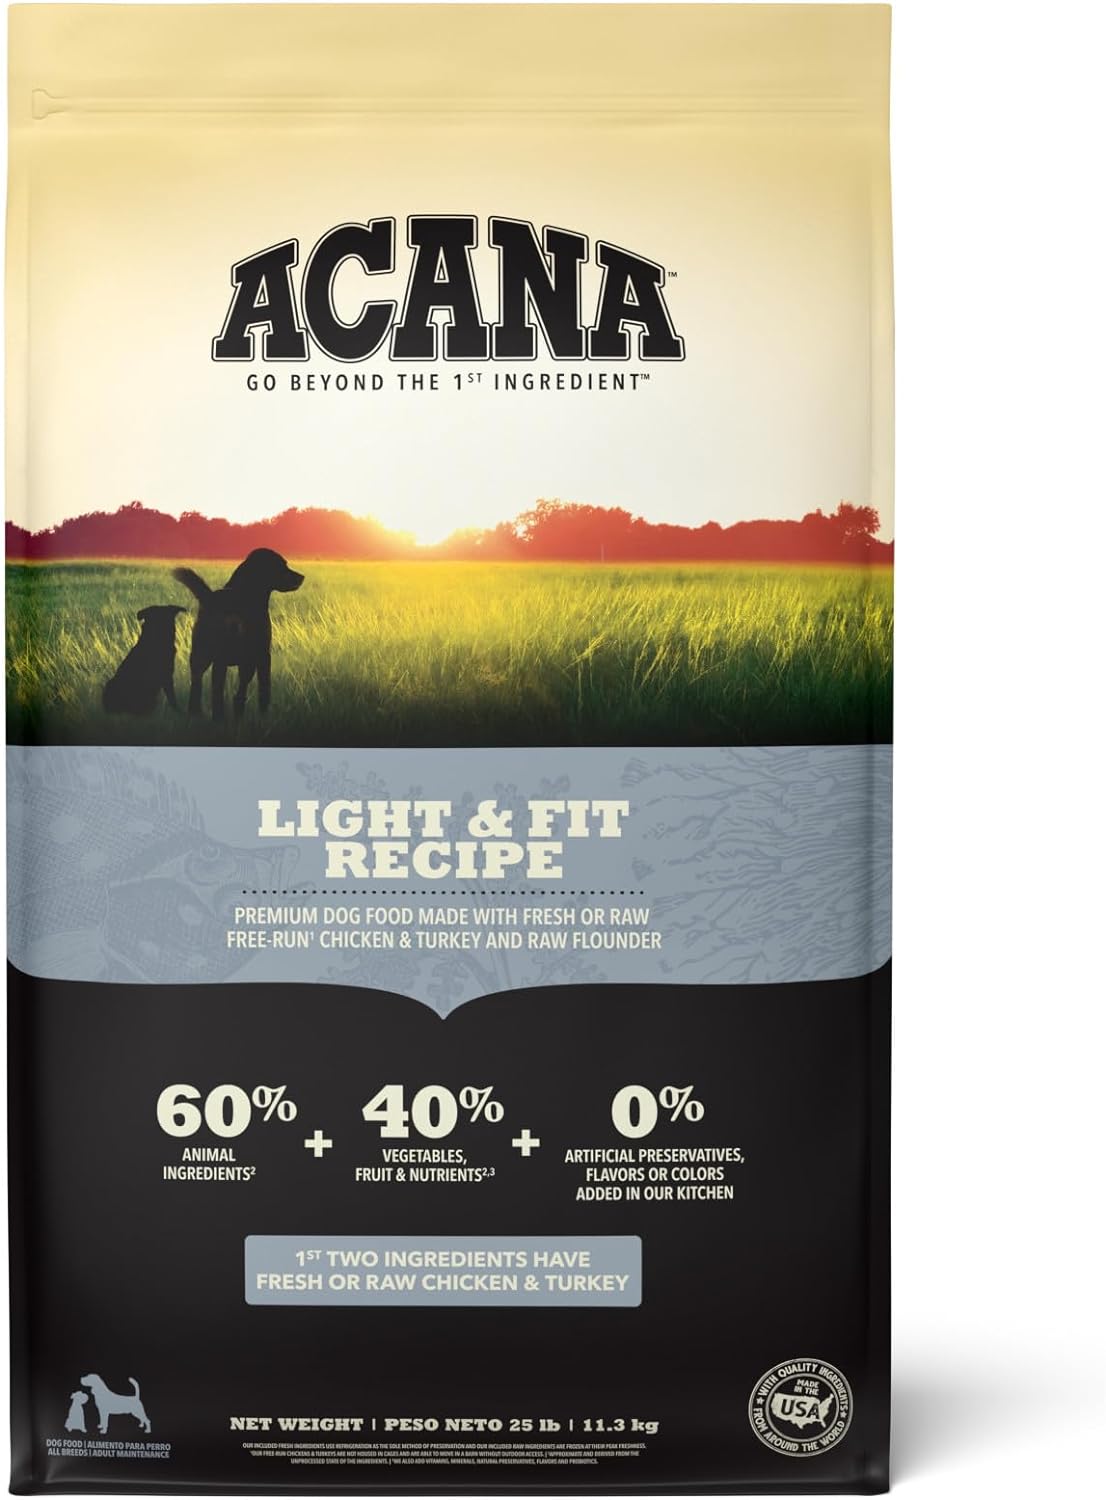 Acana Light & Fit Recipe Dry Dog Food – Gallery Image 1